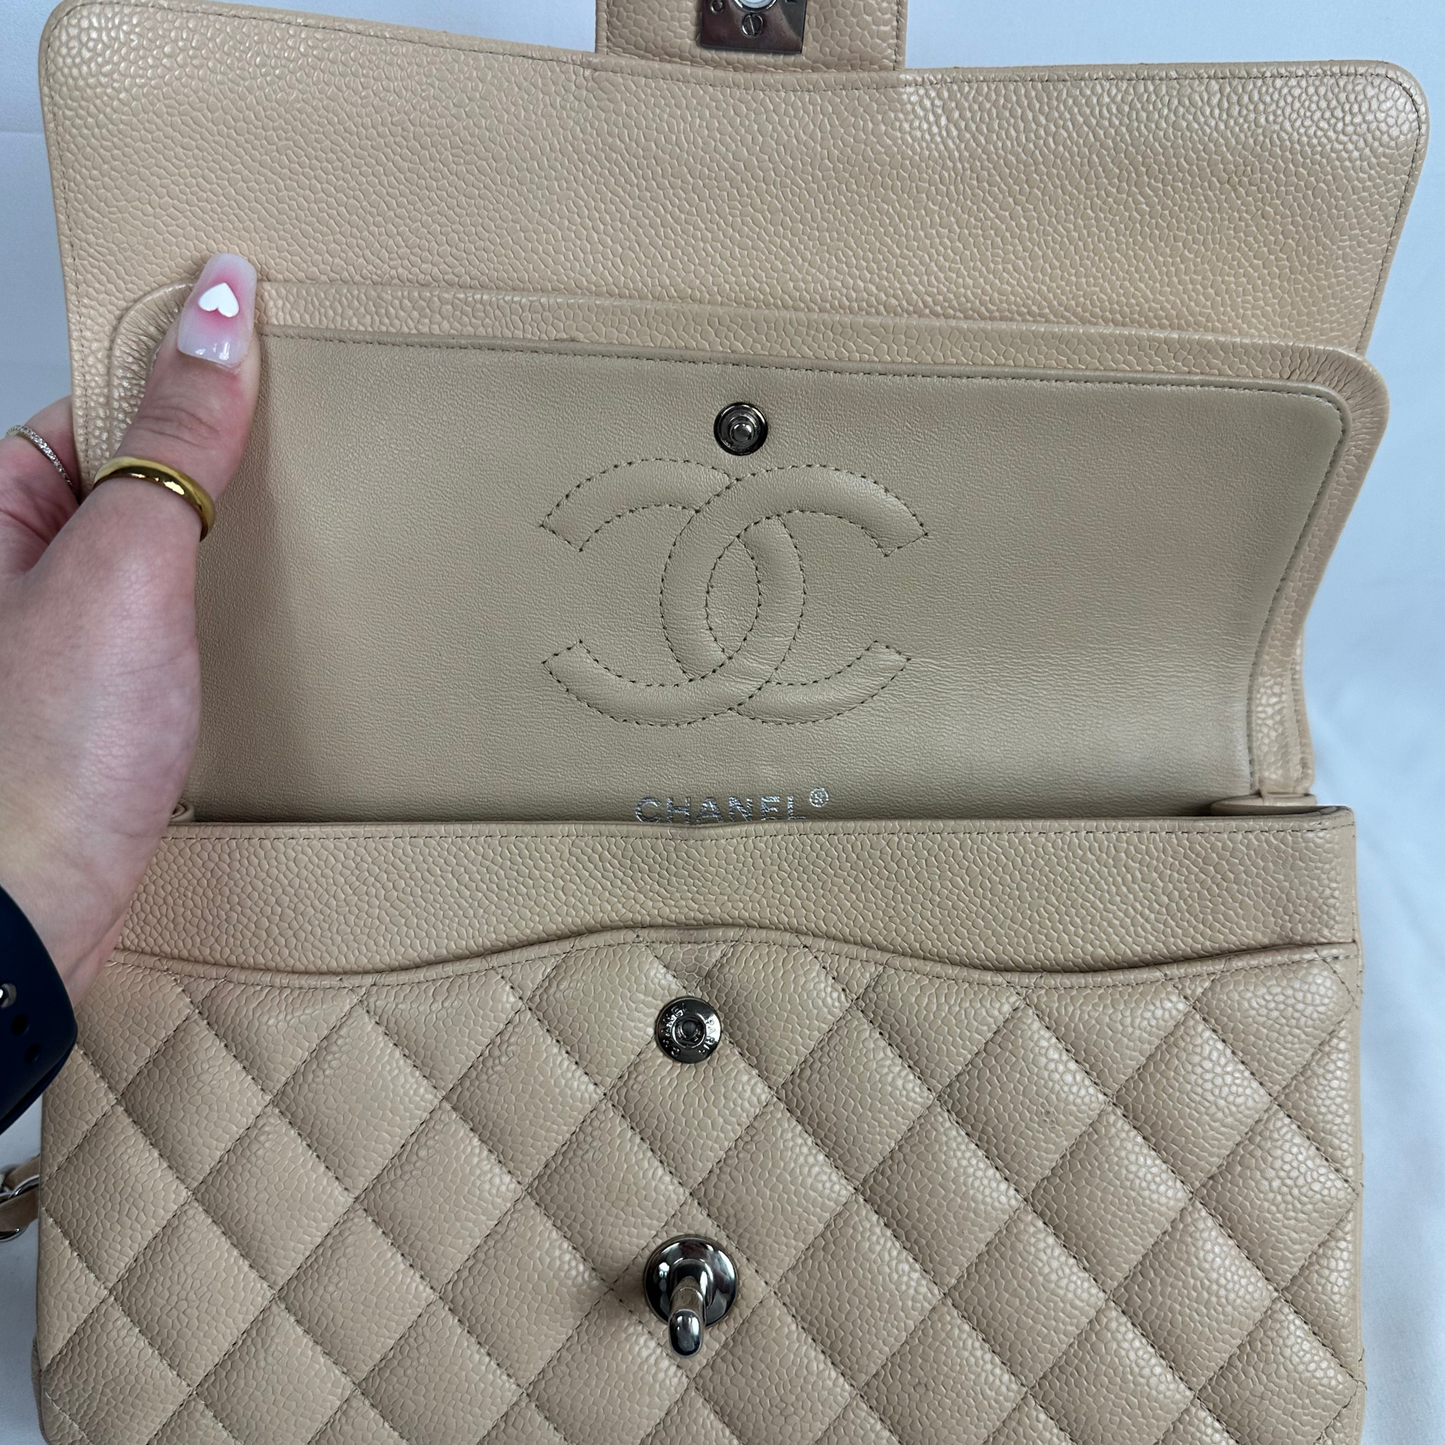 CHANEL Cream Double Flap Quilted